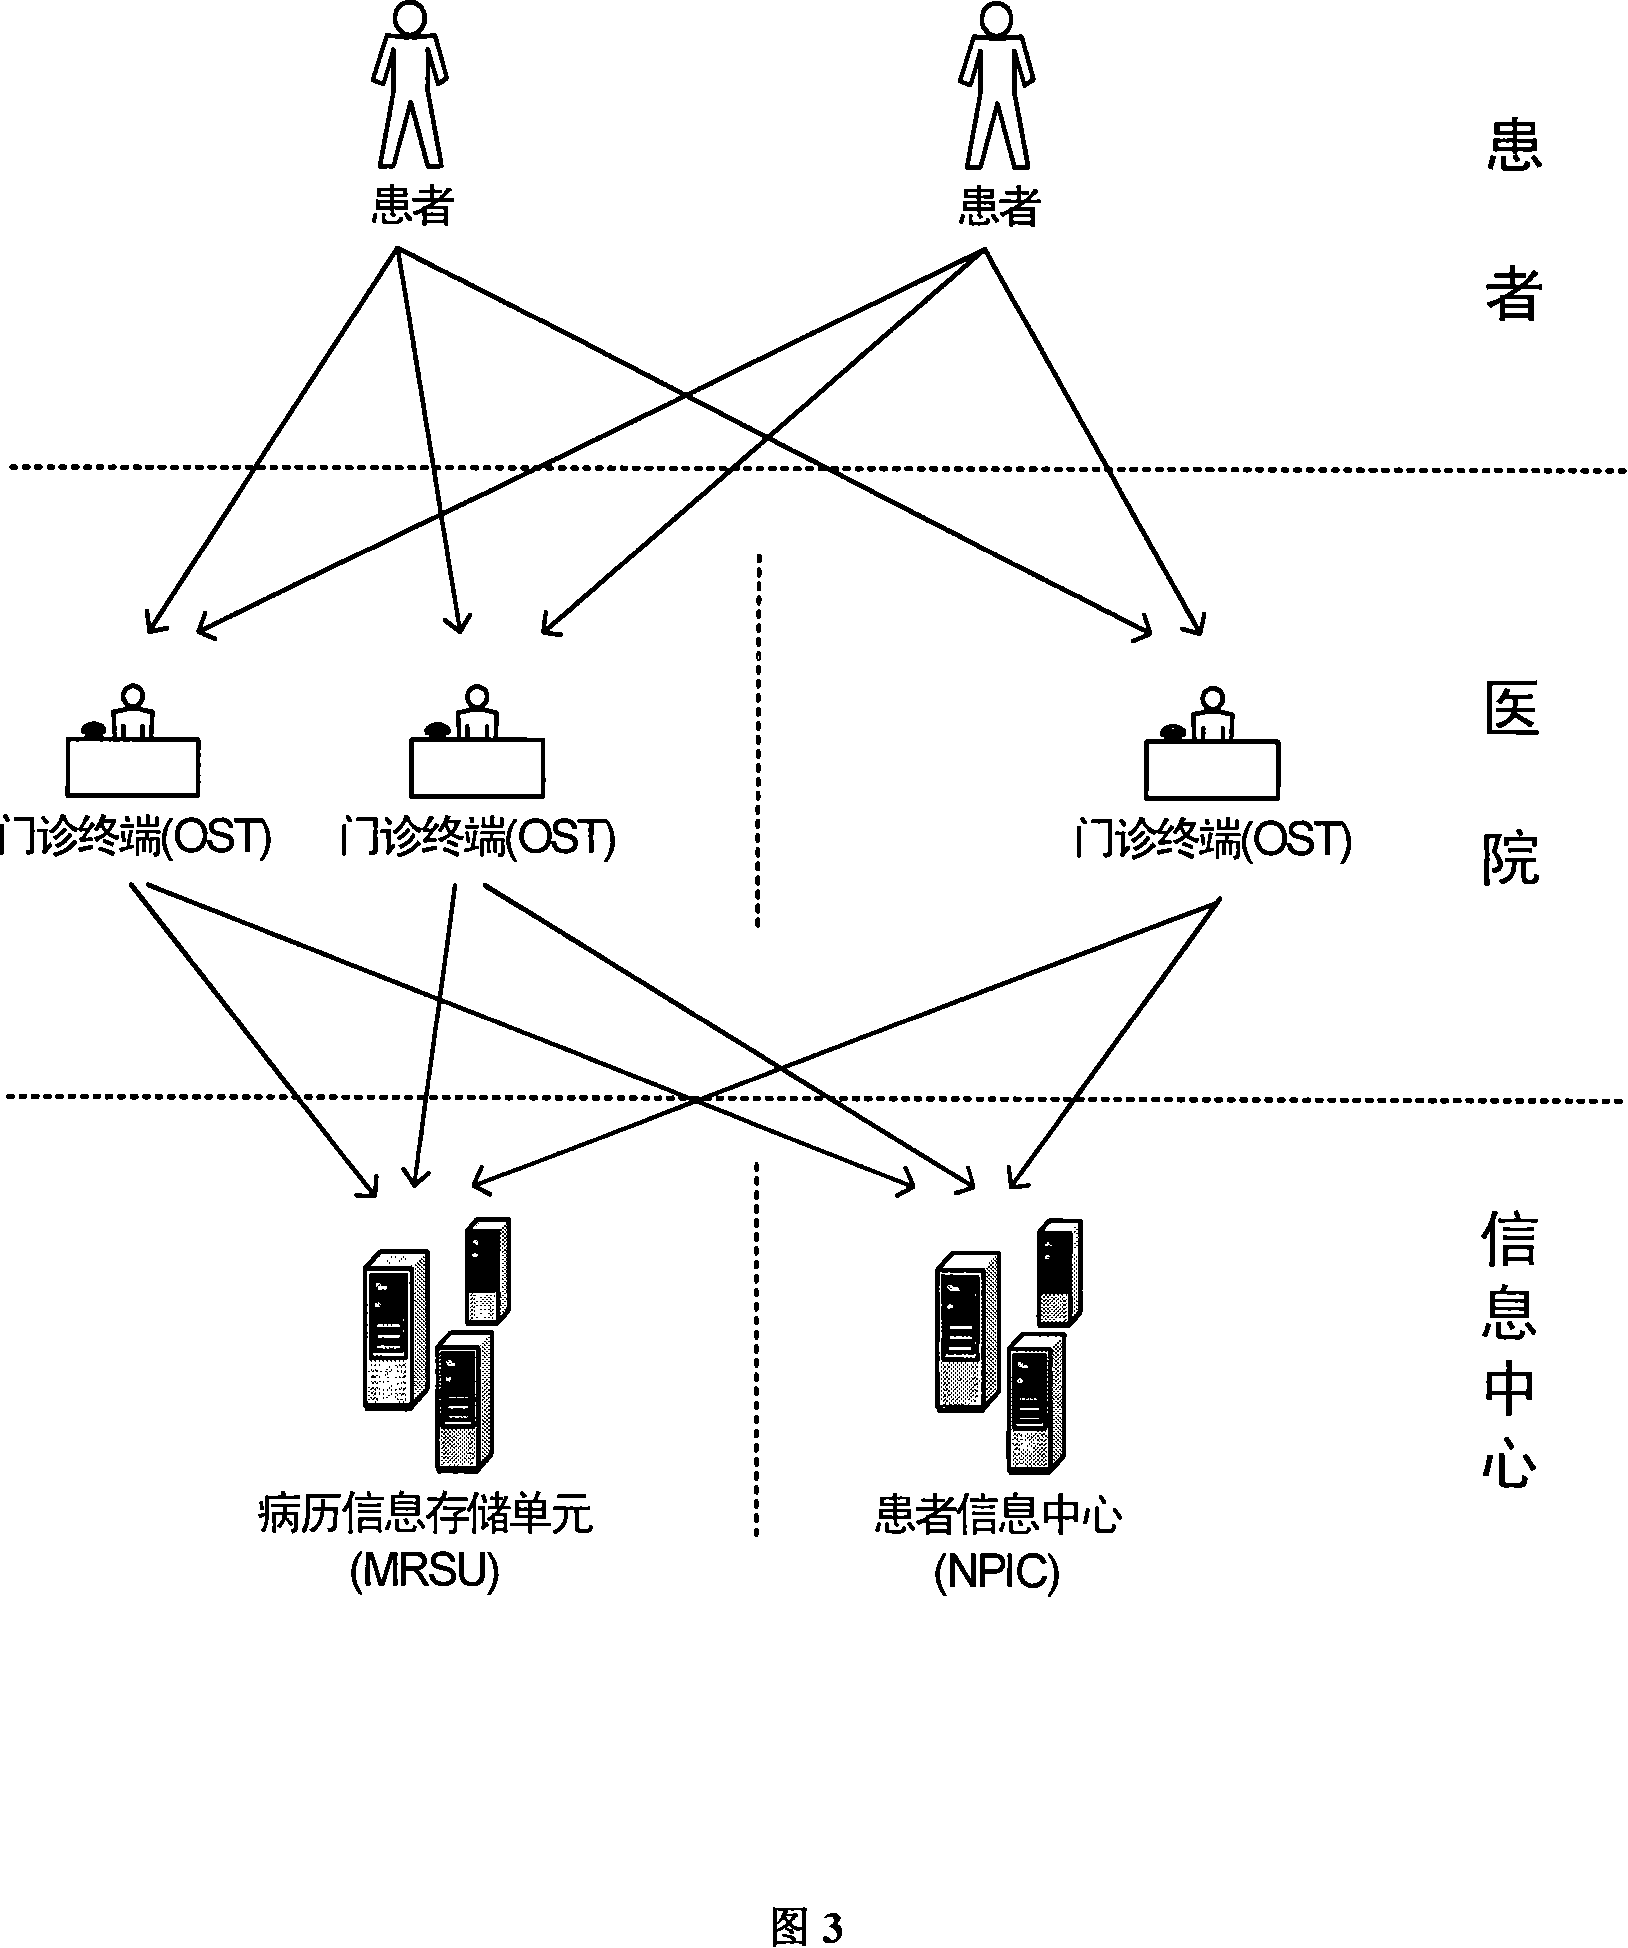 System and method for implementing electronic medical record crossing over hospitals